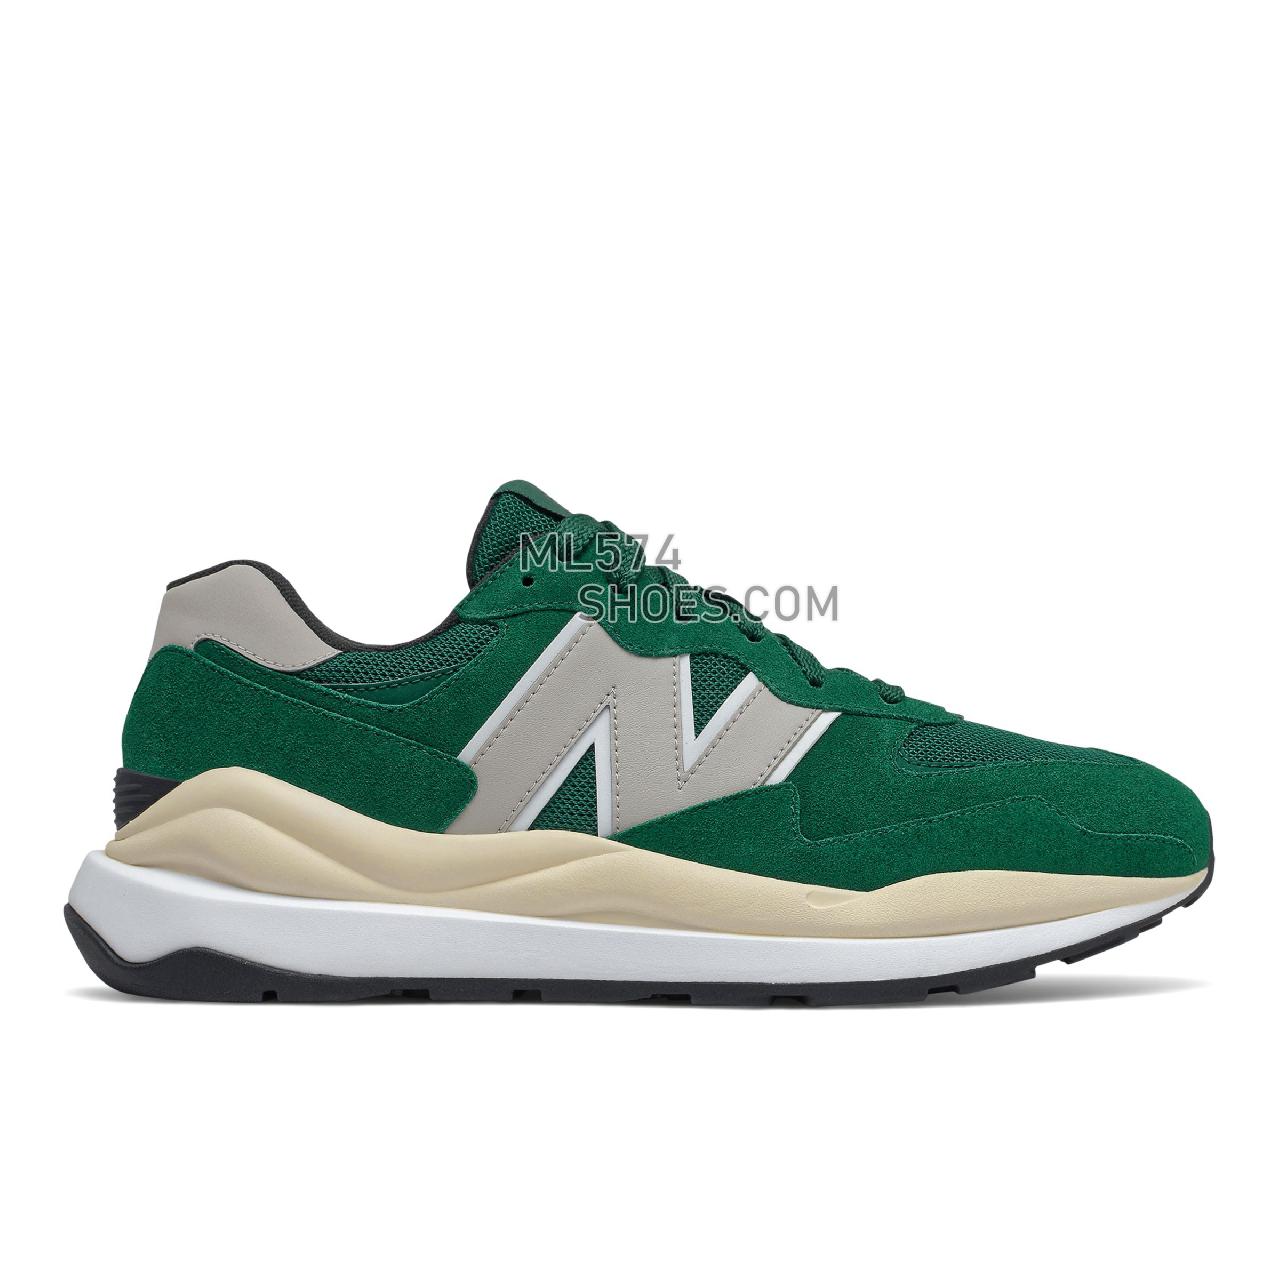 New Balance 57/40 - Men's Sport Style Sneakers - Nightwatch Green with Rain Cloud - M5740HR1